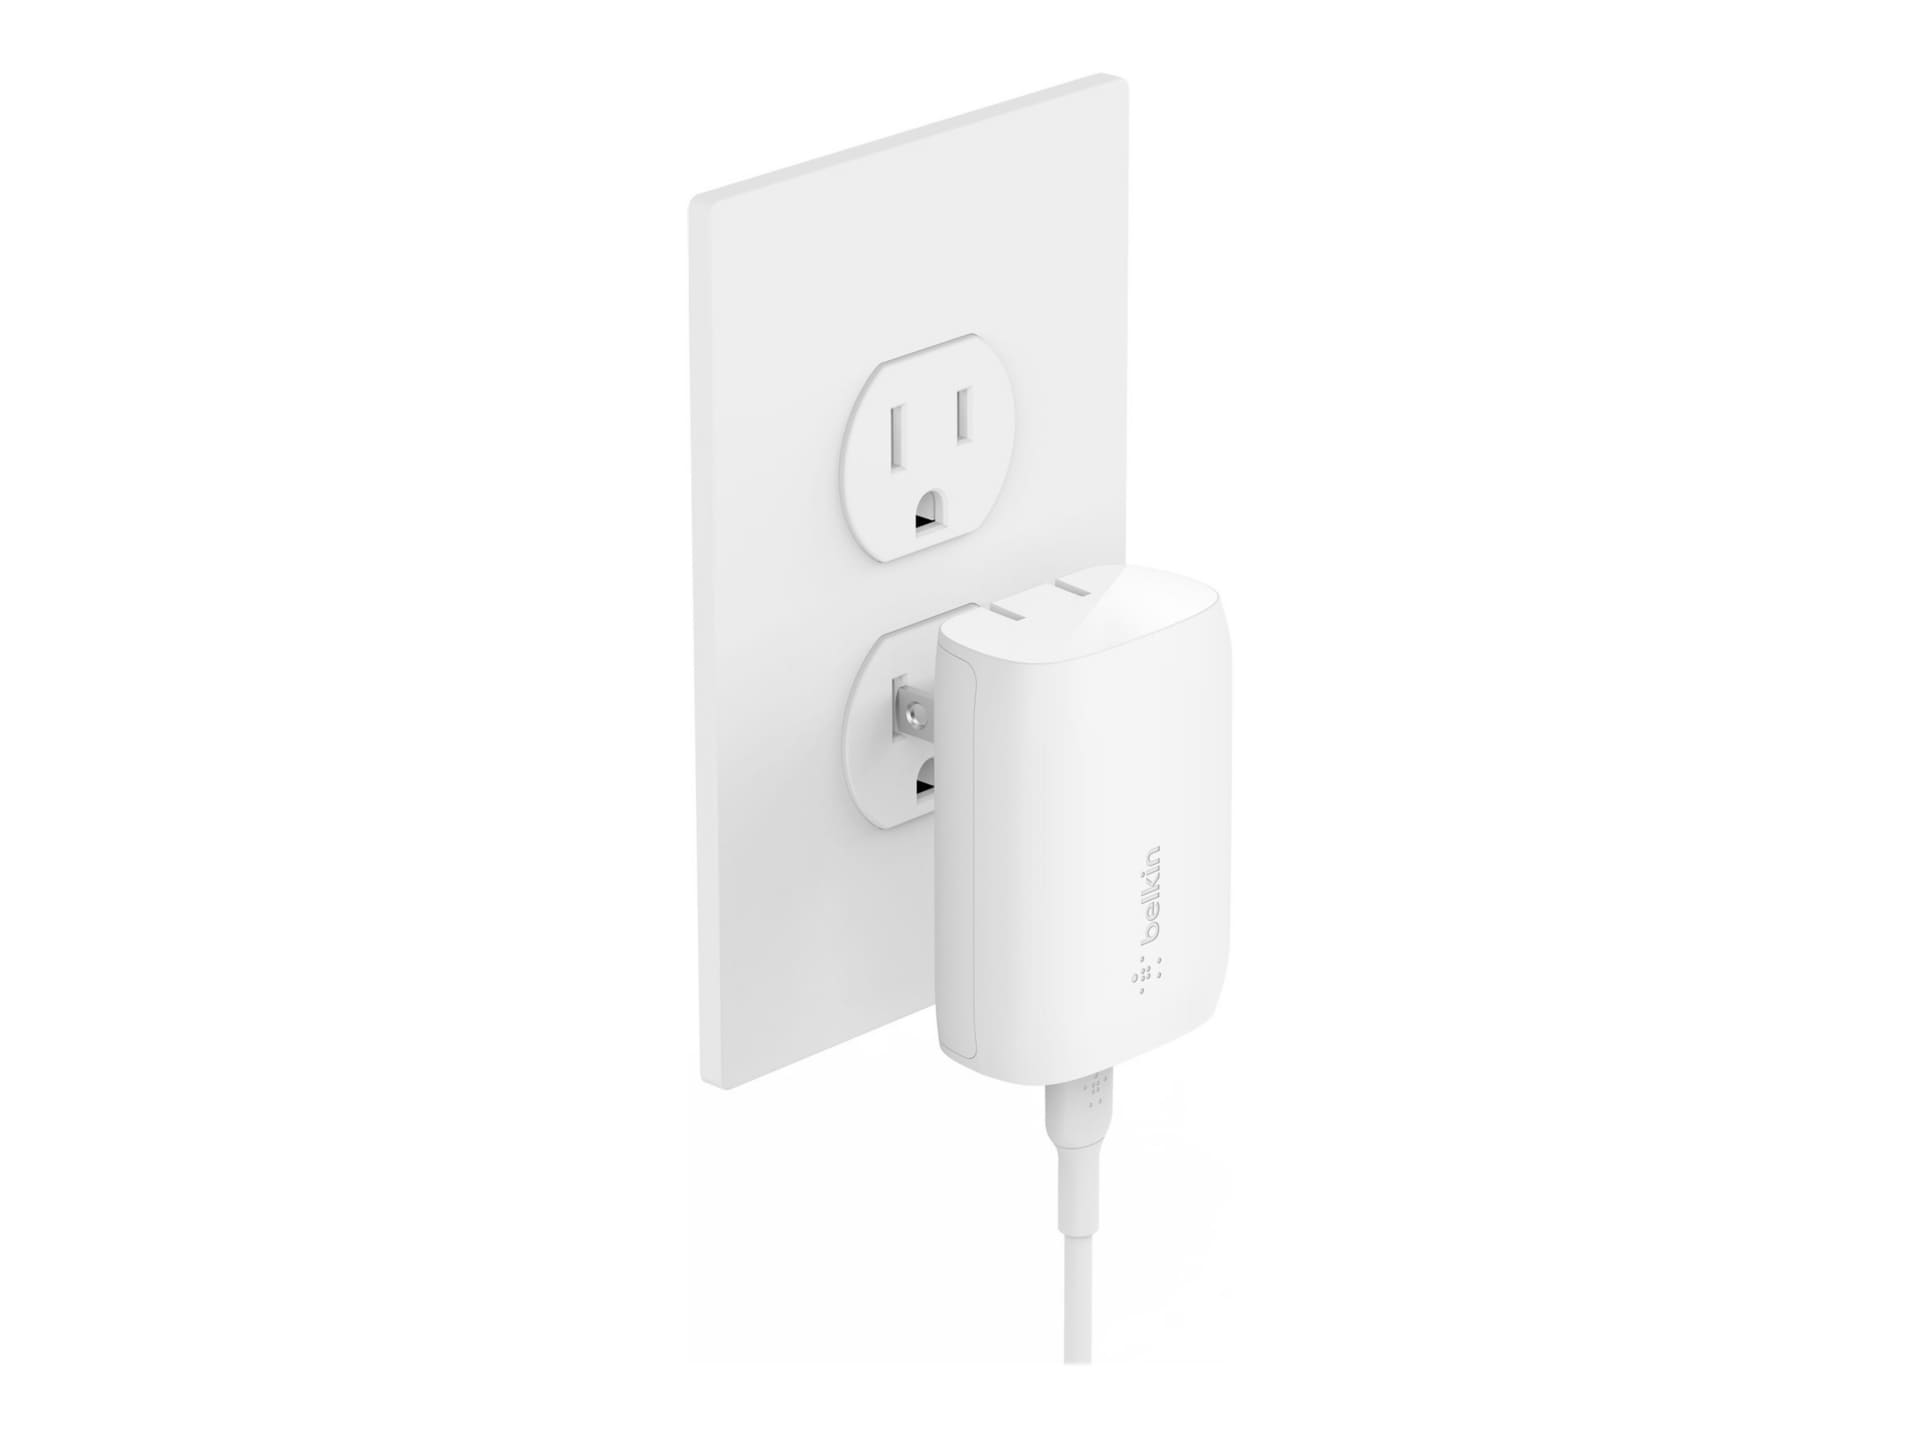 Belkin 30W Portable USB-C Wall Charger - 1xUSB-C - Fast Charging - Power Adapter - White